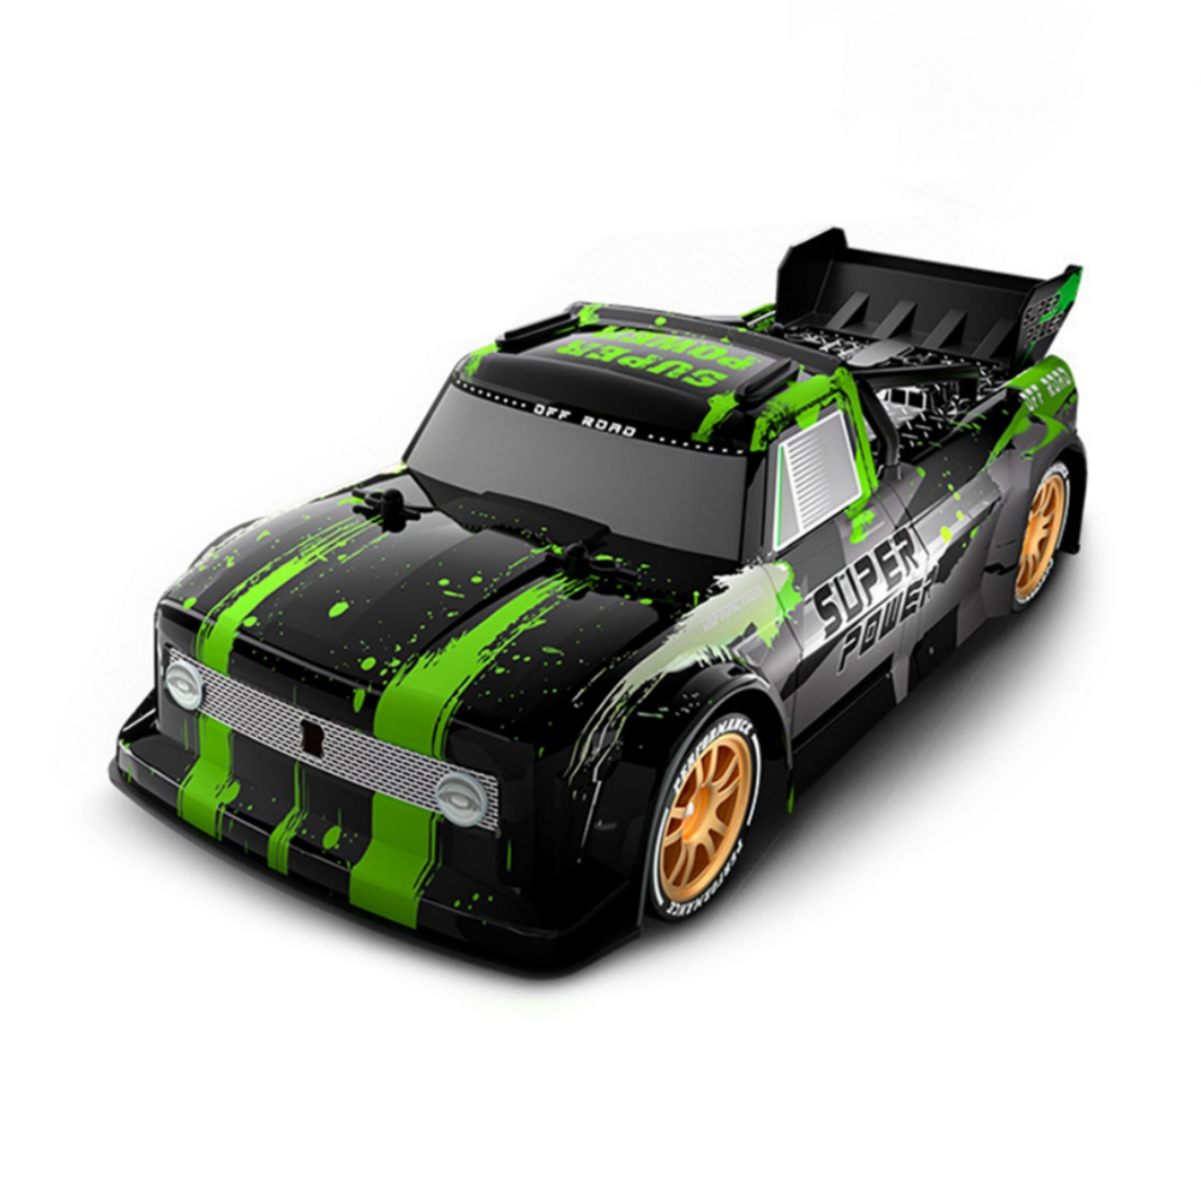 1:16 2.4g Remote Control Car with Spray Light 4wd High Speed Brushless RC Drift Car